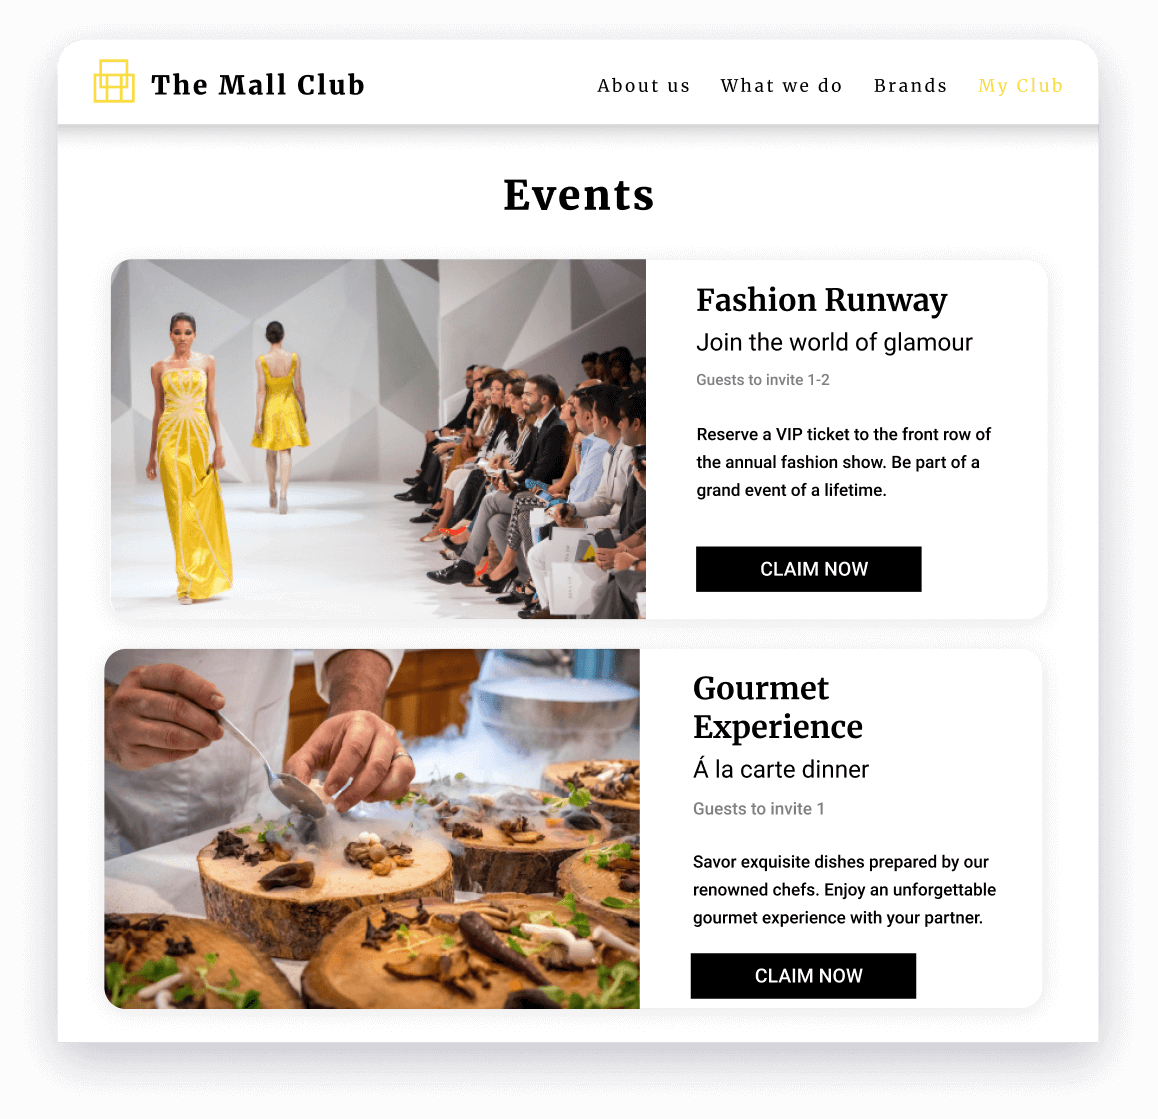 A rewards catalog centered around experiential rewards, like a fashion shows and gourmet dining experience.